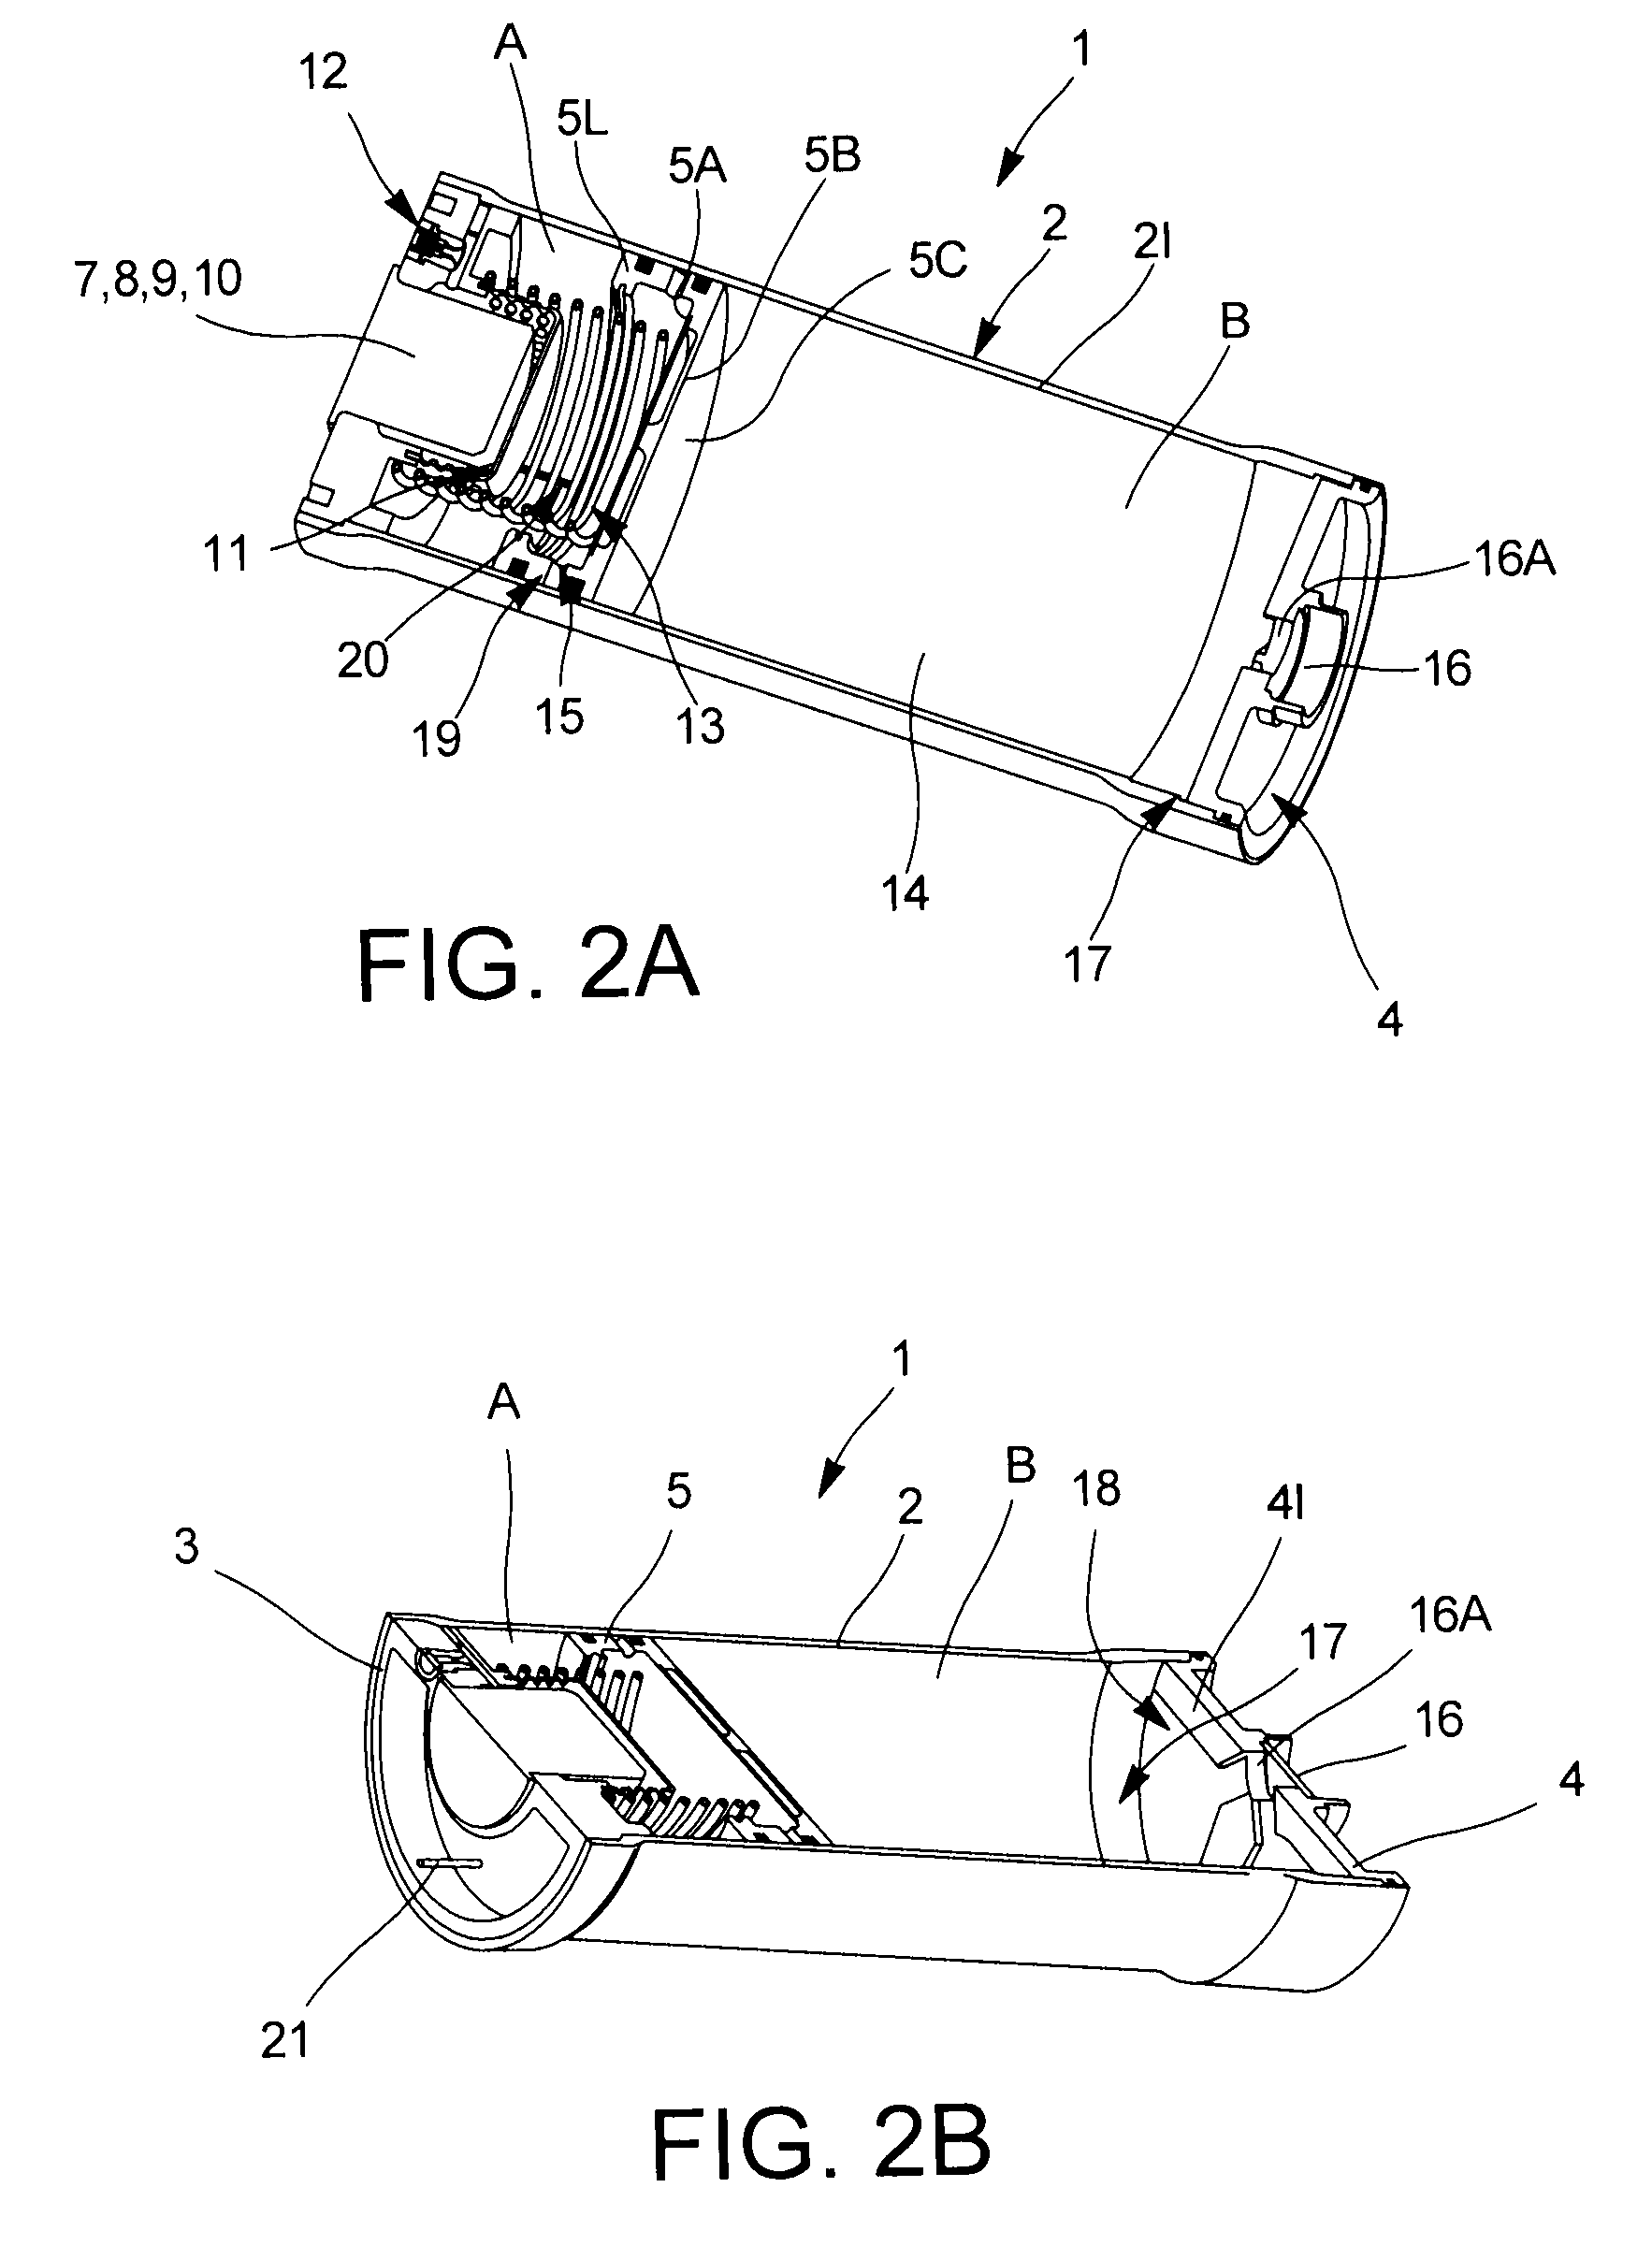 Fluid ejection device with reinforced seal